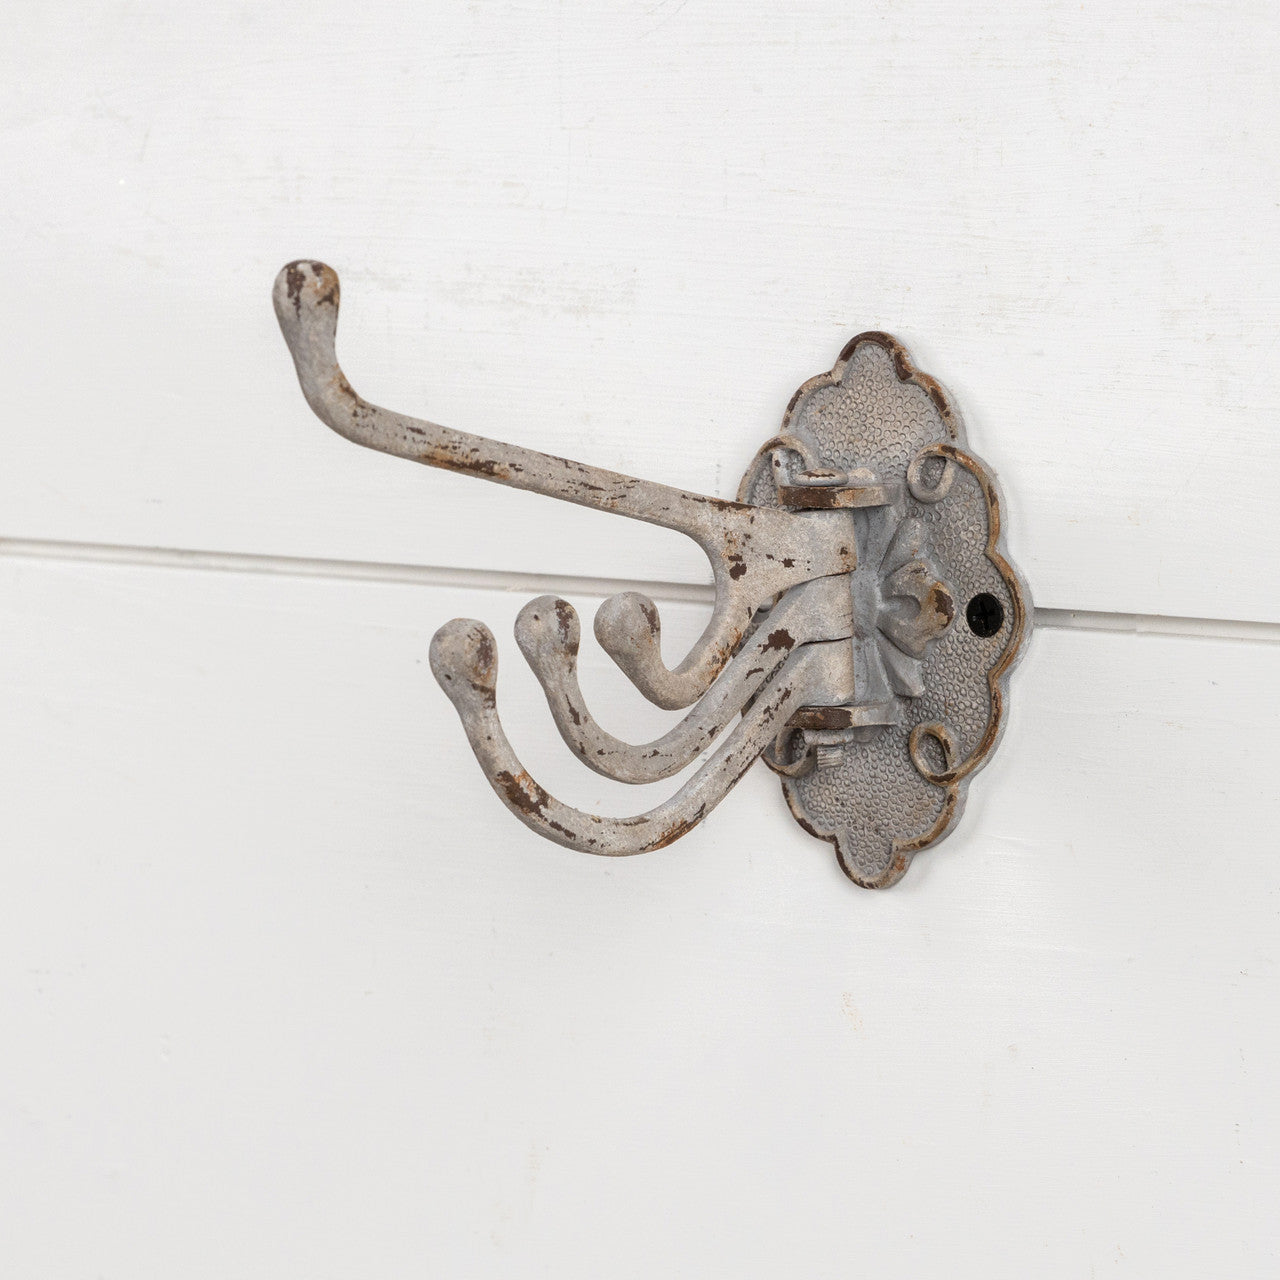 Our Warm Grey Swivel Wall Hook brings vintage style to any room. Perfect for hanging dishtowels, scarves, necklaces and more, this antique reproduction features three hooks that swivel. Add historic charm to your farmhouse entryway, kitchen or bath with this wall-mounted hook. 2.75"L x 5.25"Deep x 4.25"H